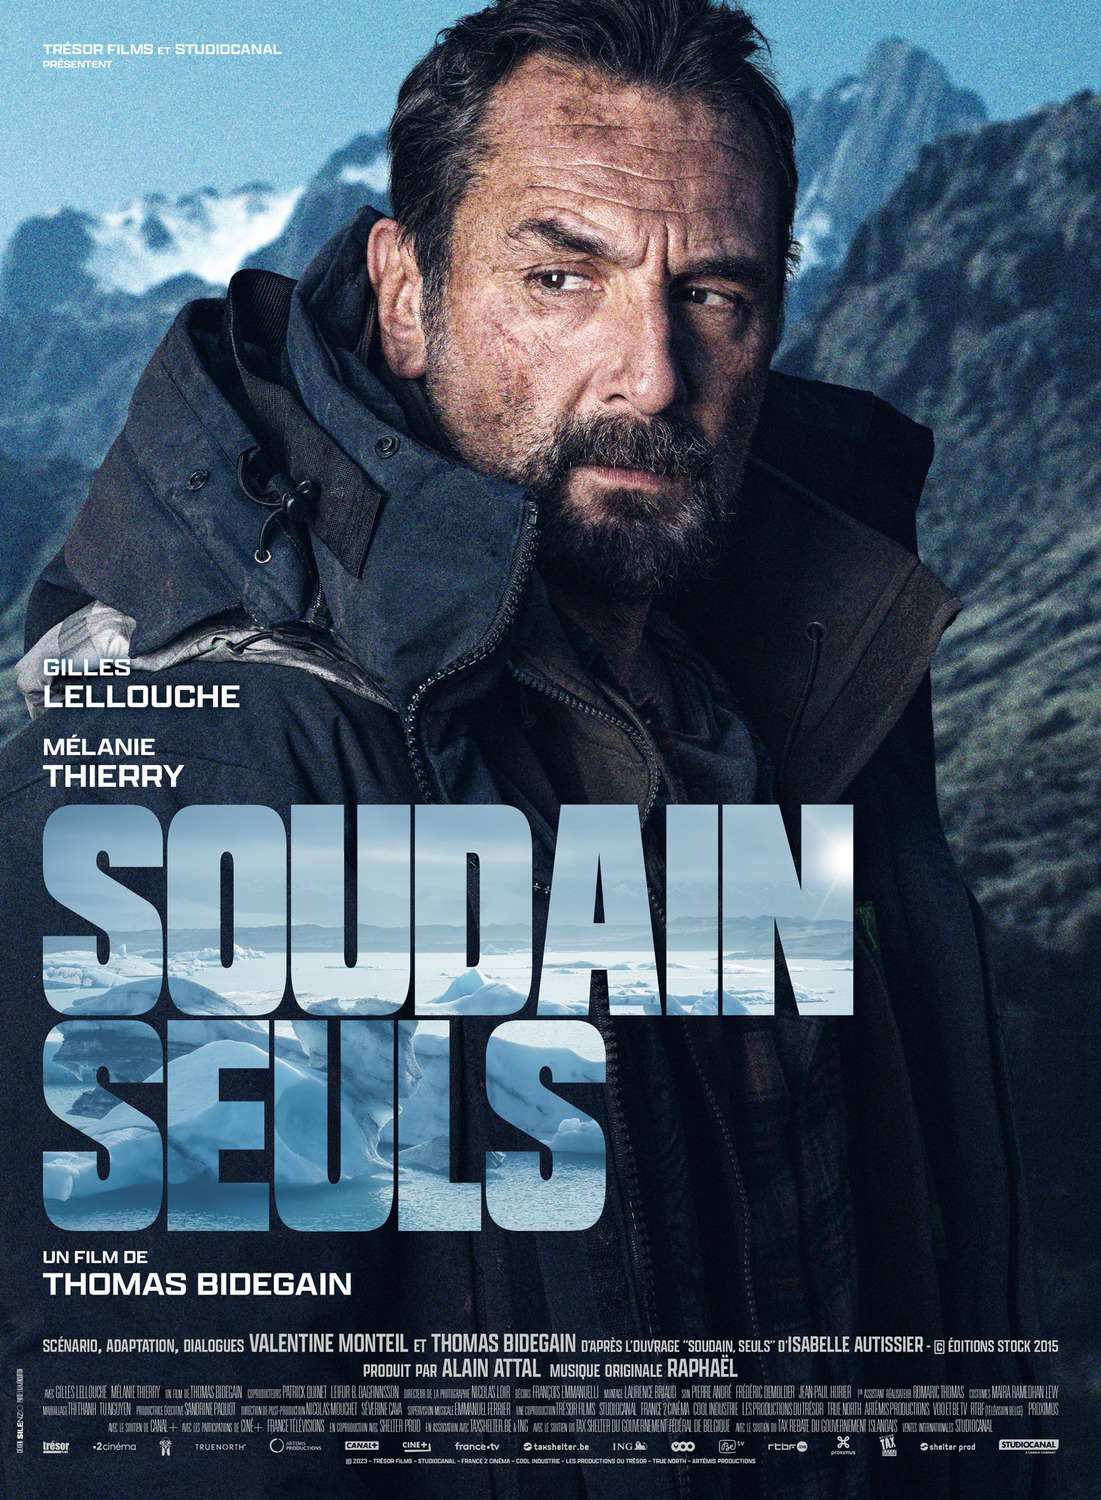 Extra Large Movie Poster Image for Soudain seuls (#4 of 4)